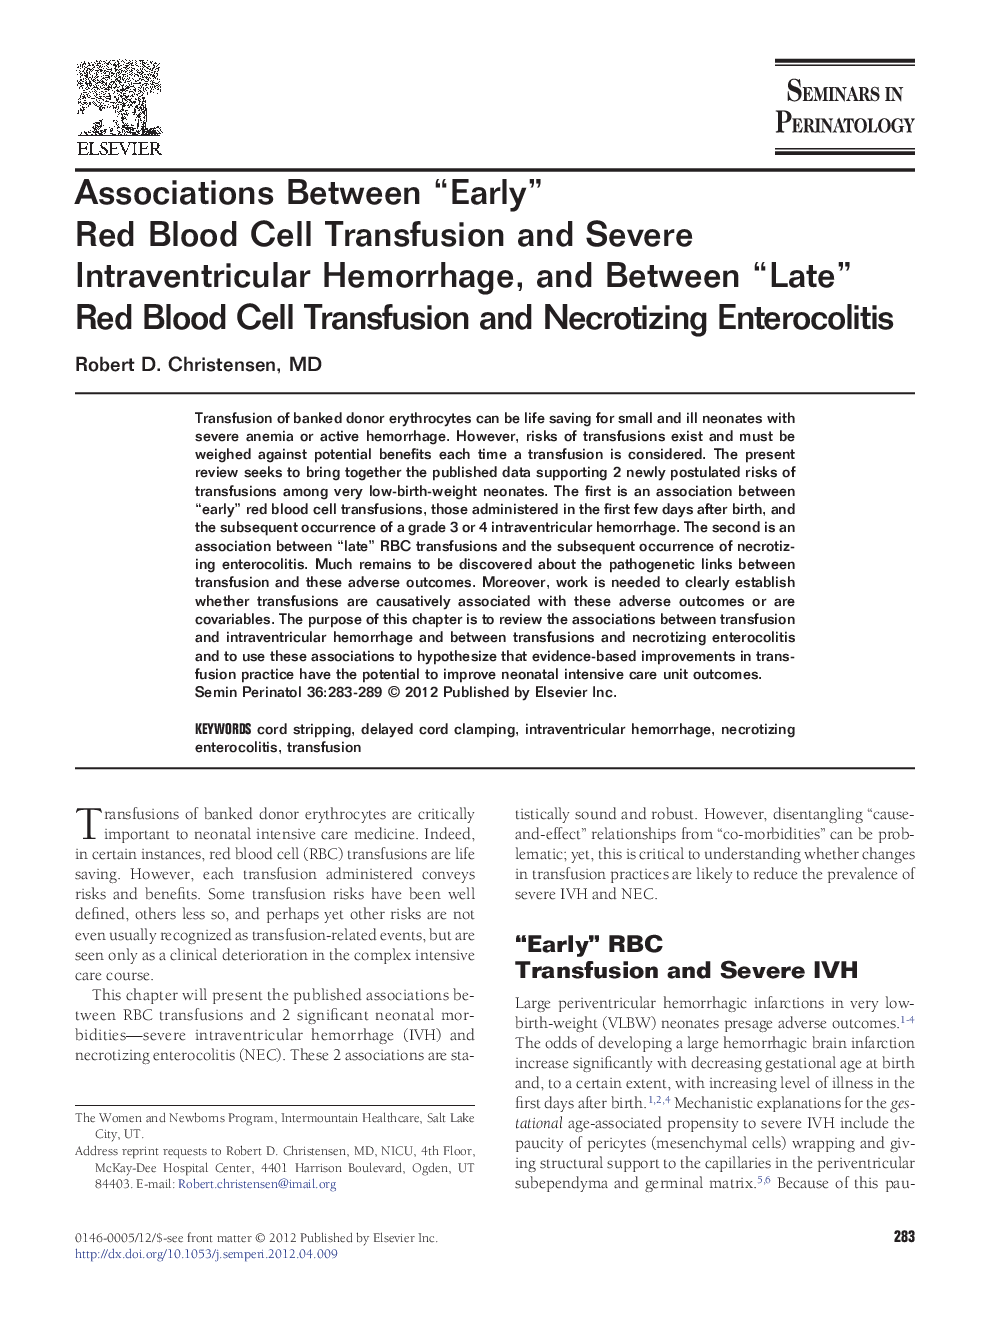 Associations Between “Early” Red Blood Cell Transfusion and Severe Intraventricular Hemorrhage, and Between “Late” Red Blood Cell Transfusion and Necrotizing Enterocolitis